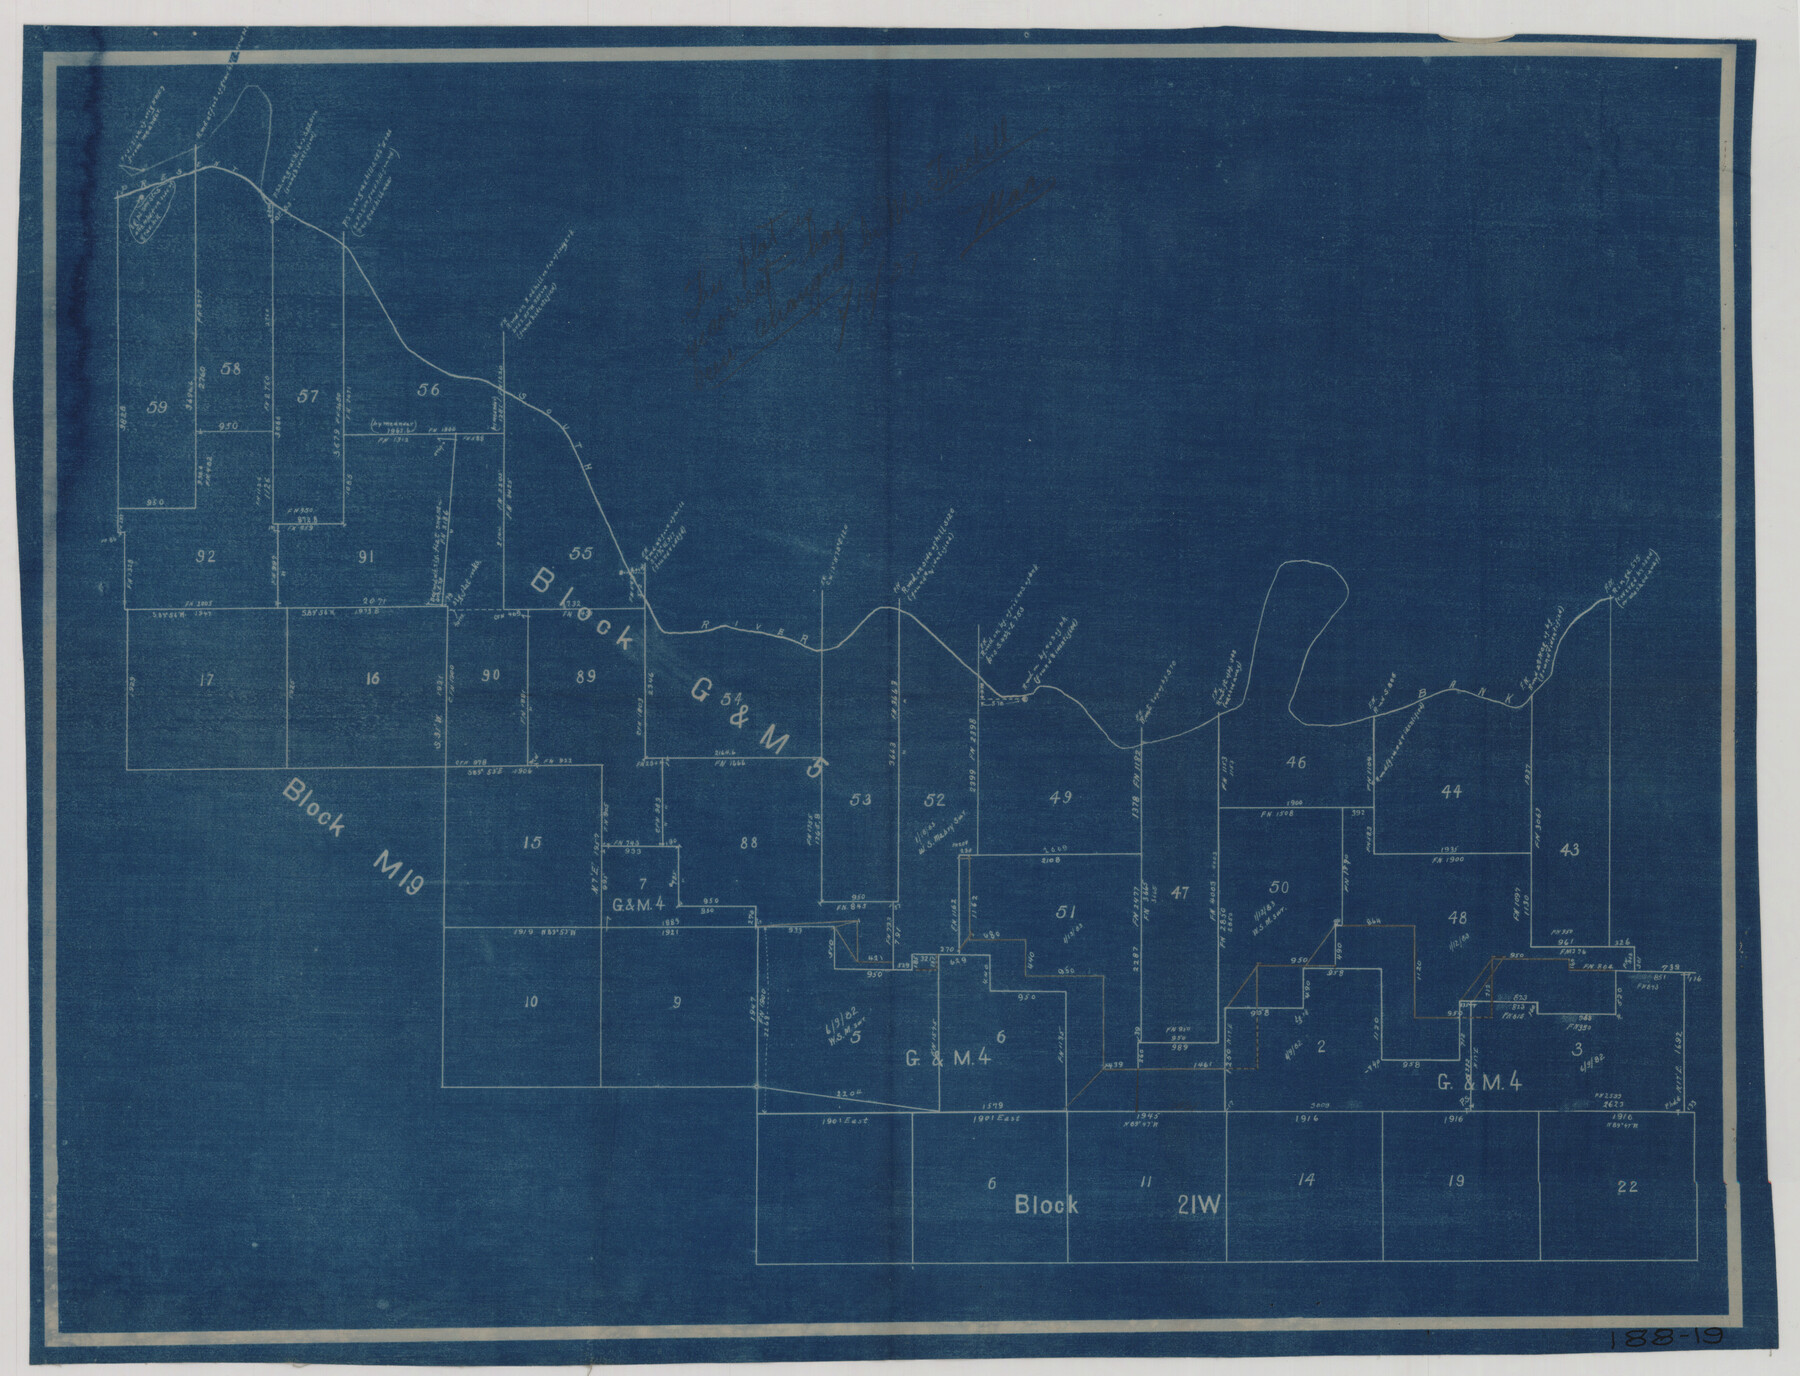 93081, [Sketch of part of G. & M. Block 5, G. & M. Block 4, Block M19 and Block 21W], Twichell Survey Records